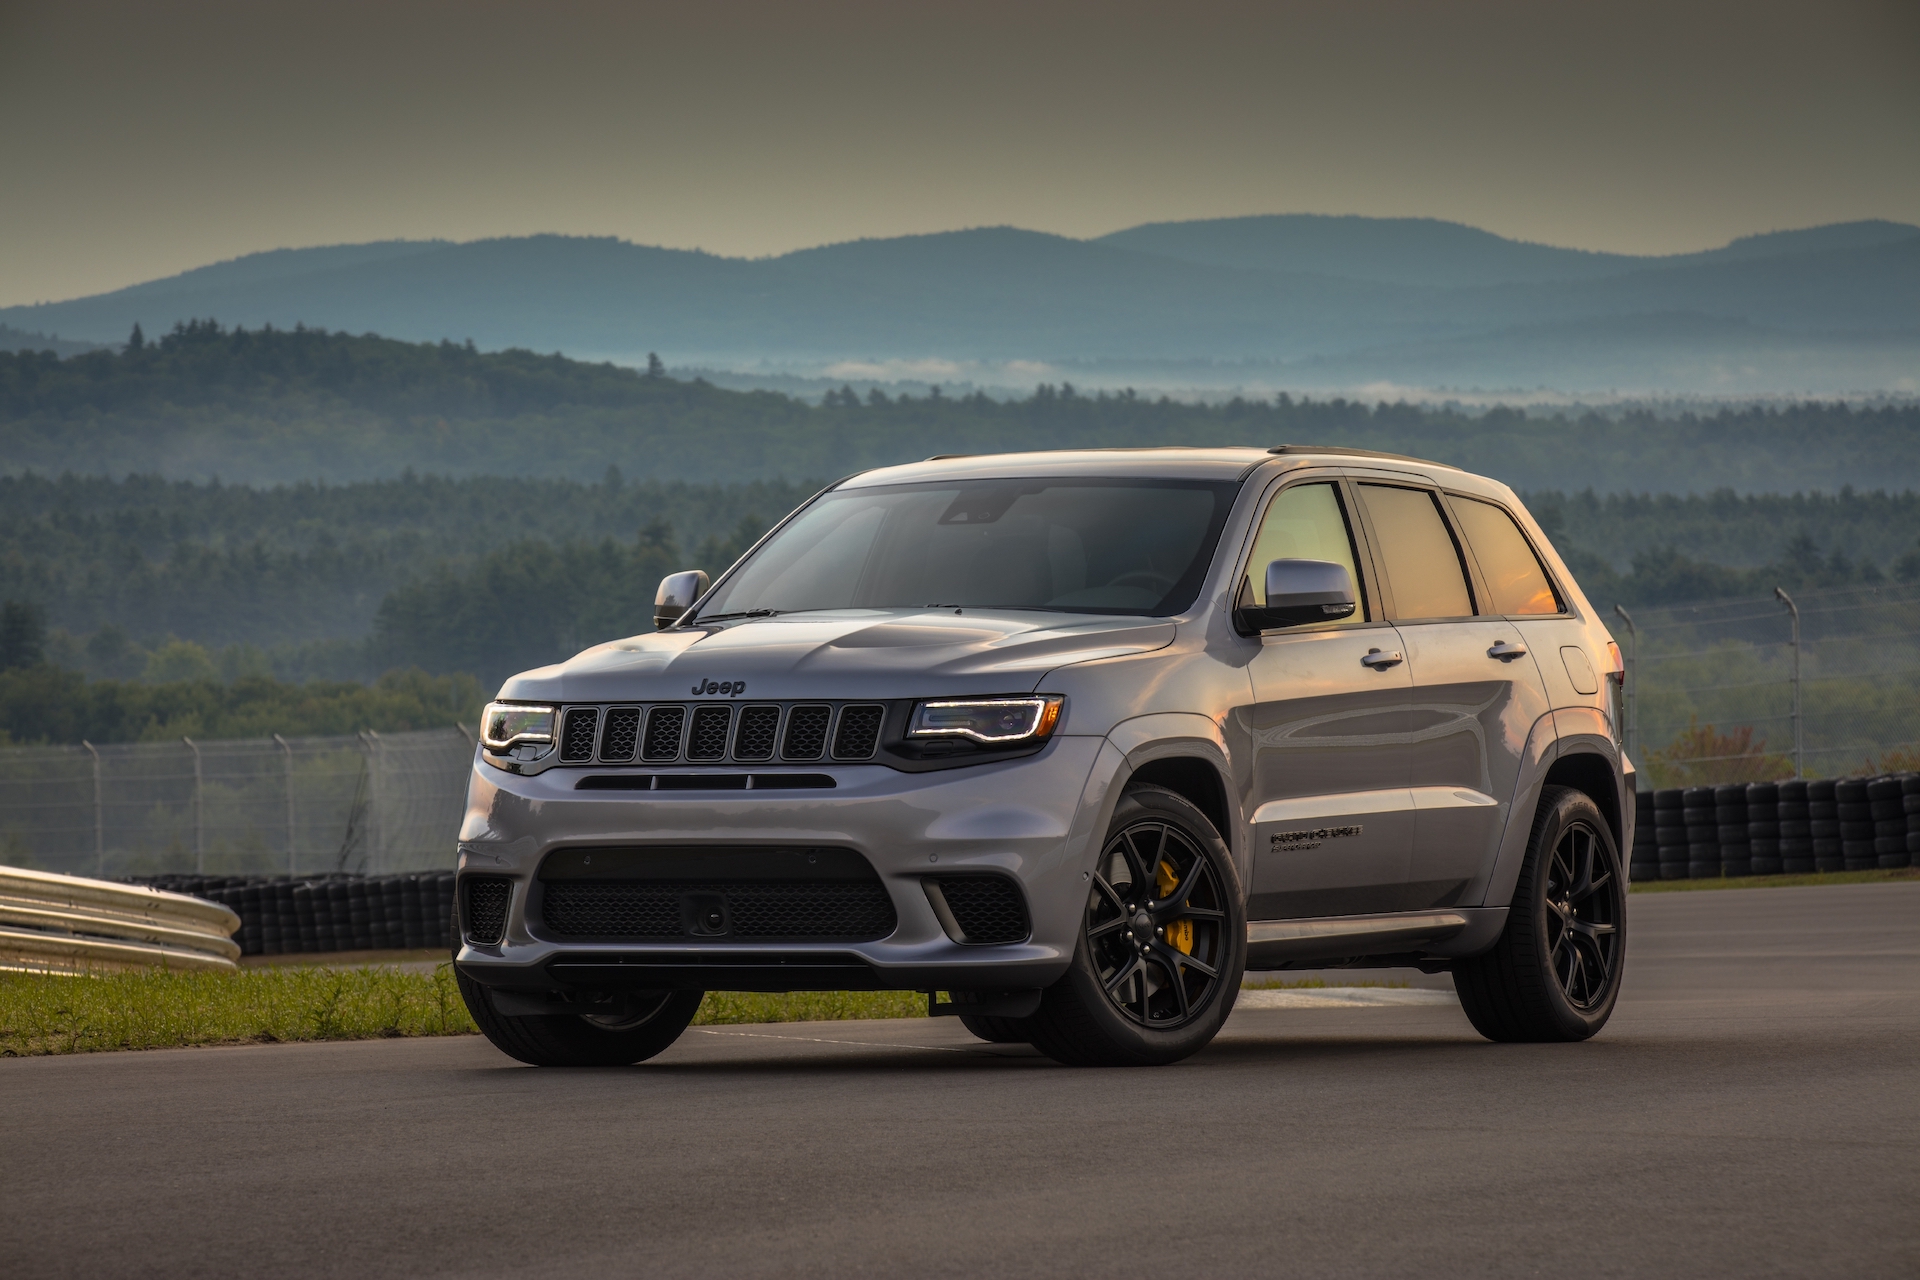 Powering the 2021 Jeep® Grand Cherokee Trackhawk is a supercharged 6.2-liter V-8 engine delivering 707 horsepower and 645 lb.-ft. of torque